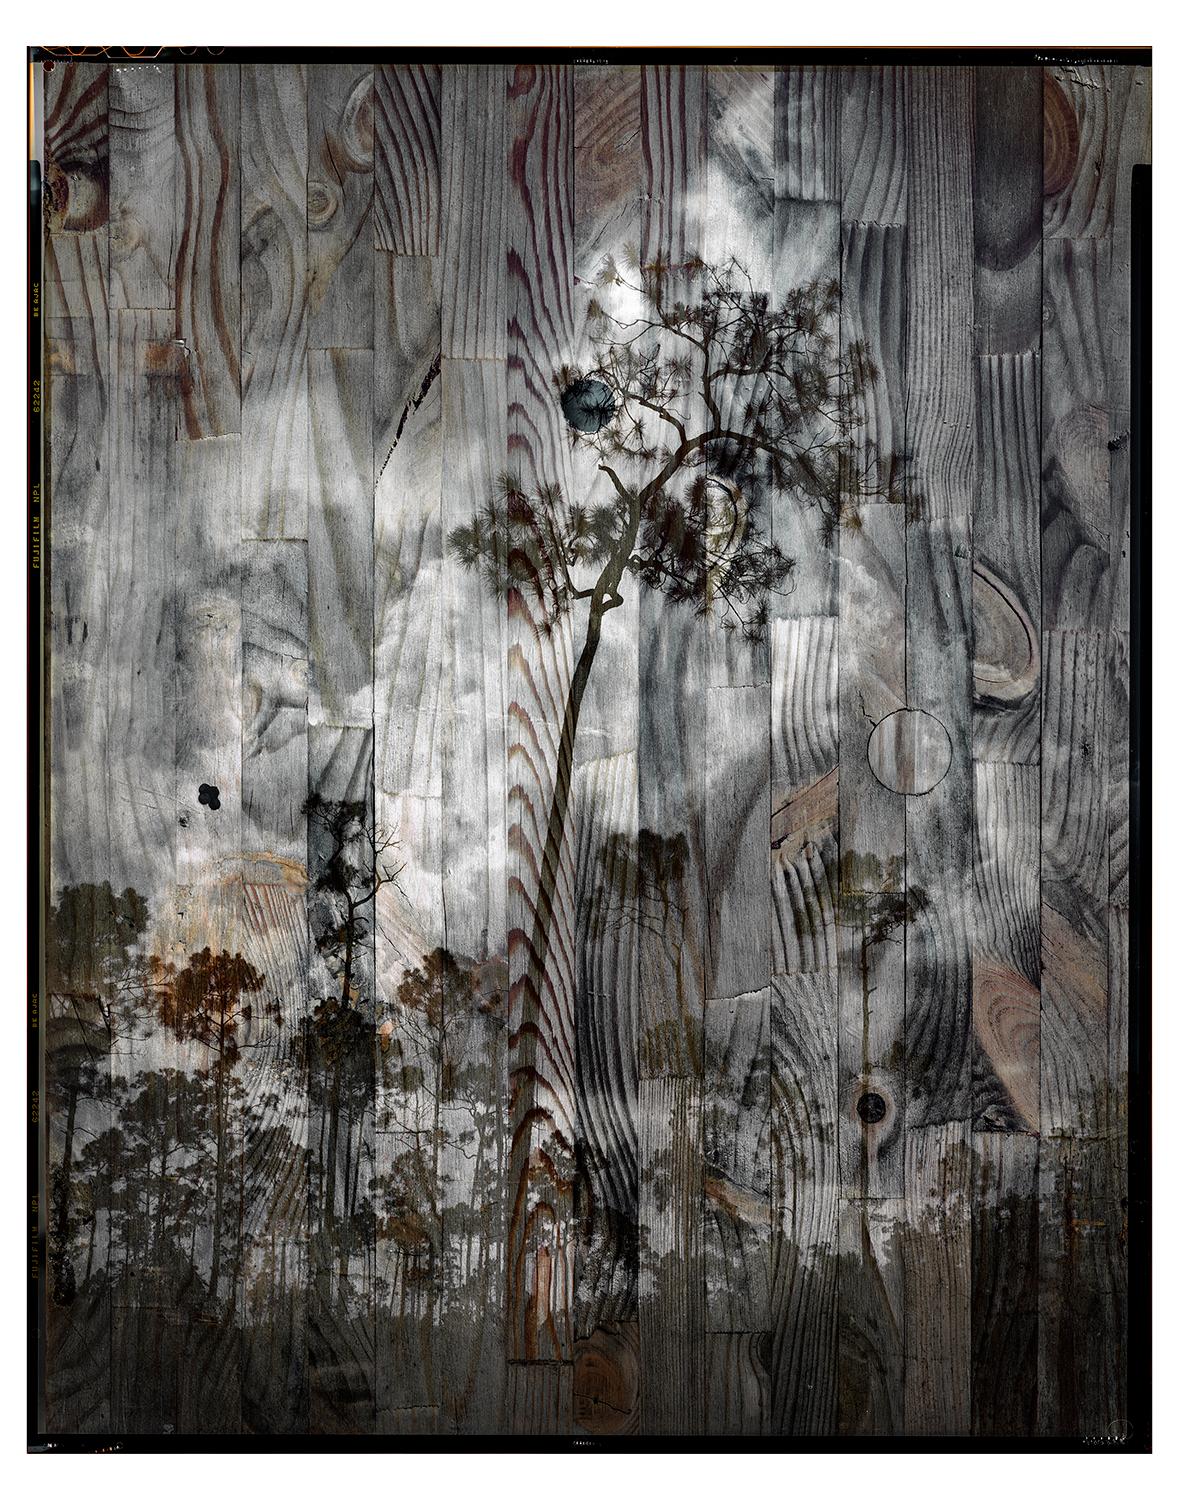 Archival Pigment Print

Everglades montage

All available sizes & editions for each size of this photograph:
50" X 40"- Edition of 5 + 2 Artist Proofs

This photograph will be printed once payment has been received and will ship directly from the